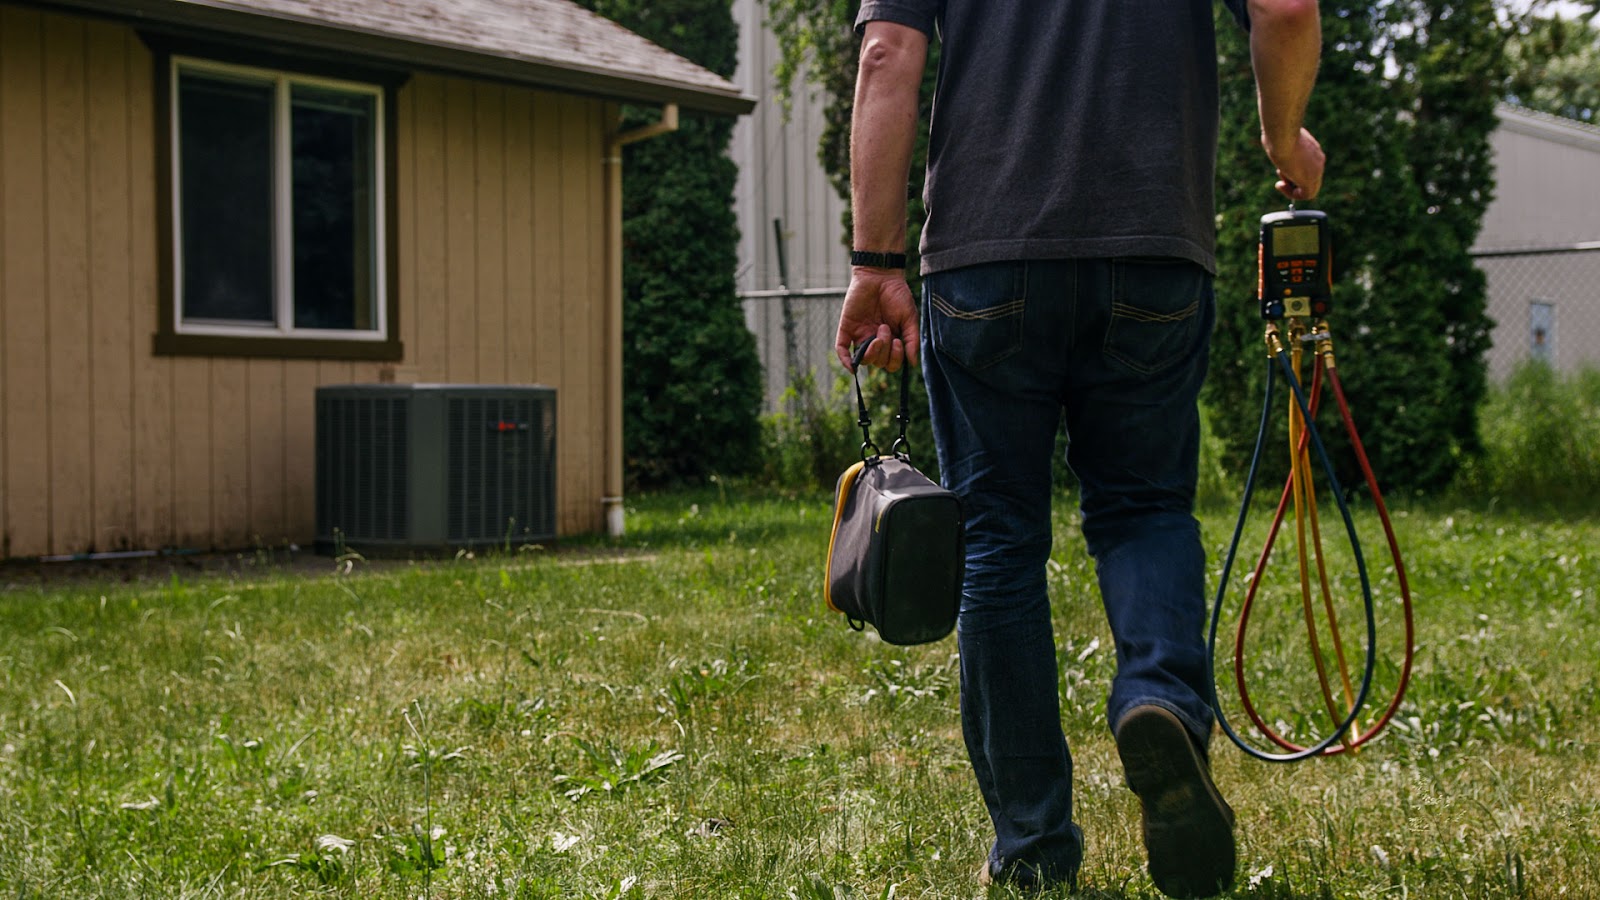 An HVAC tech walks towards a house with tools in-hand, prepared to start working.